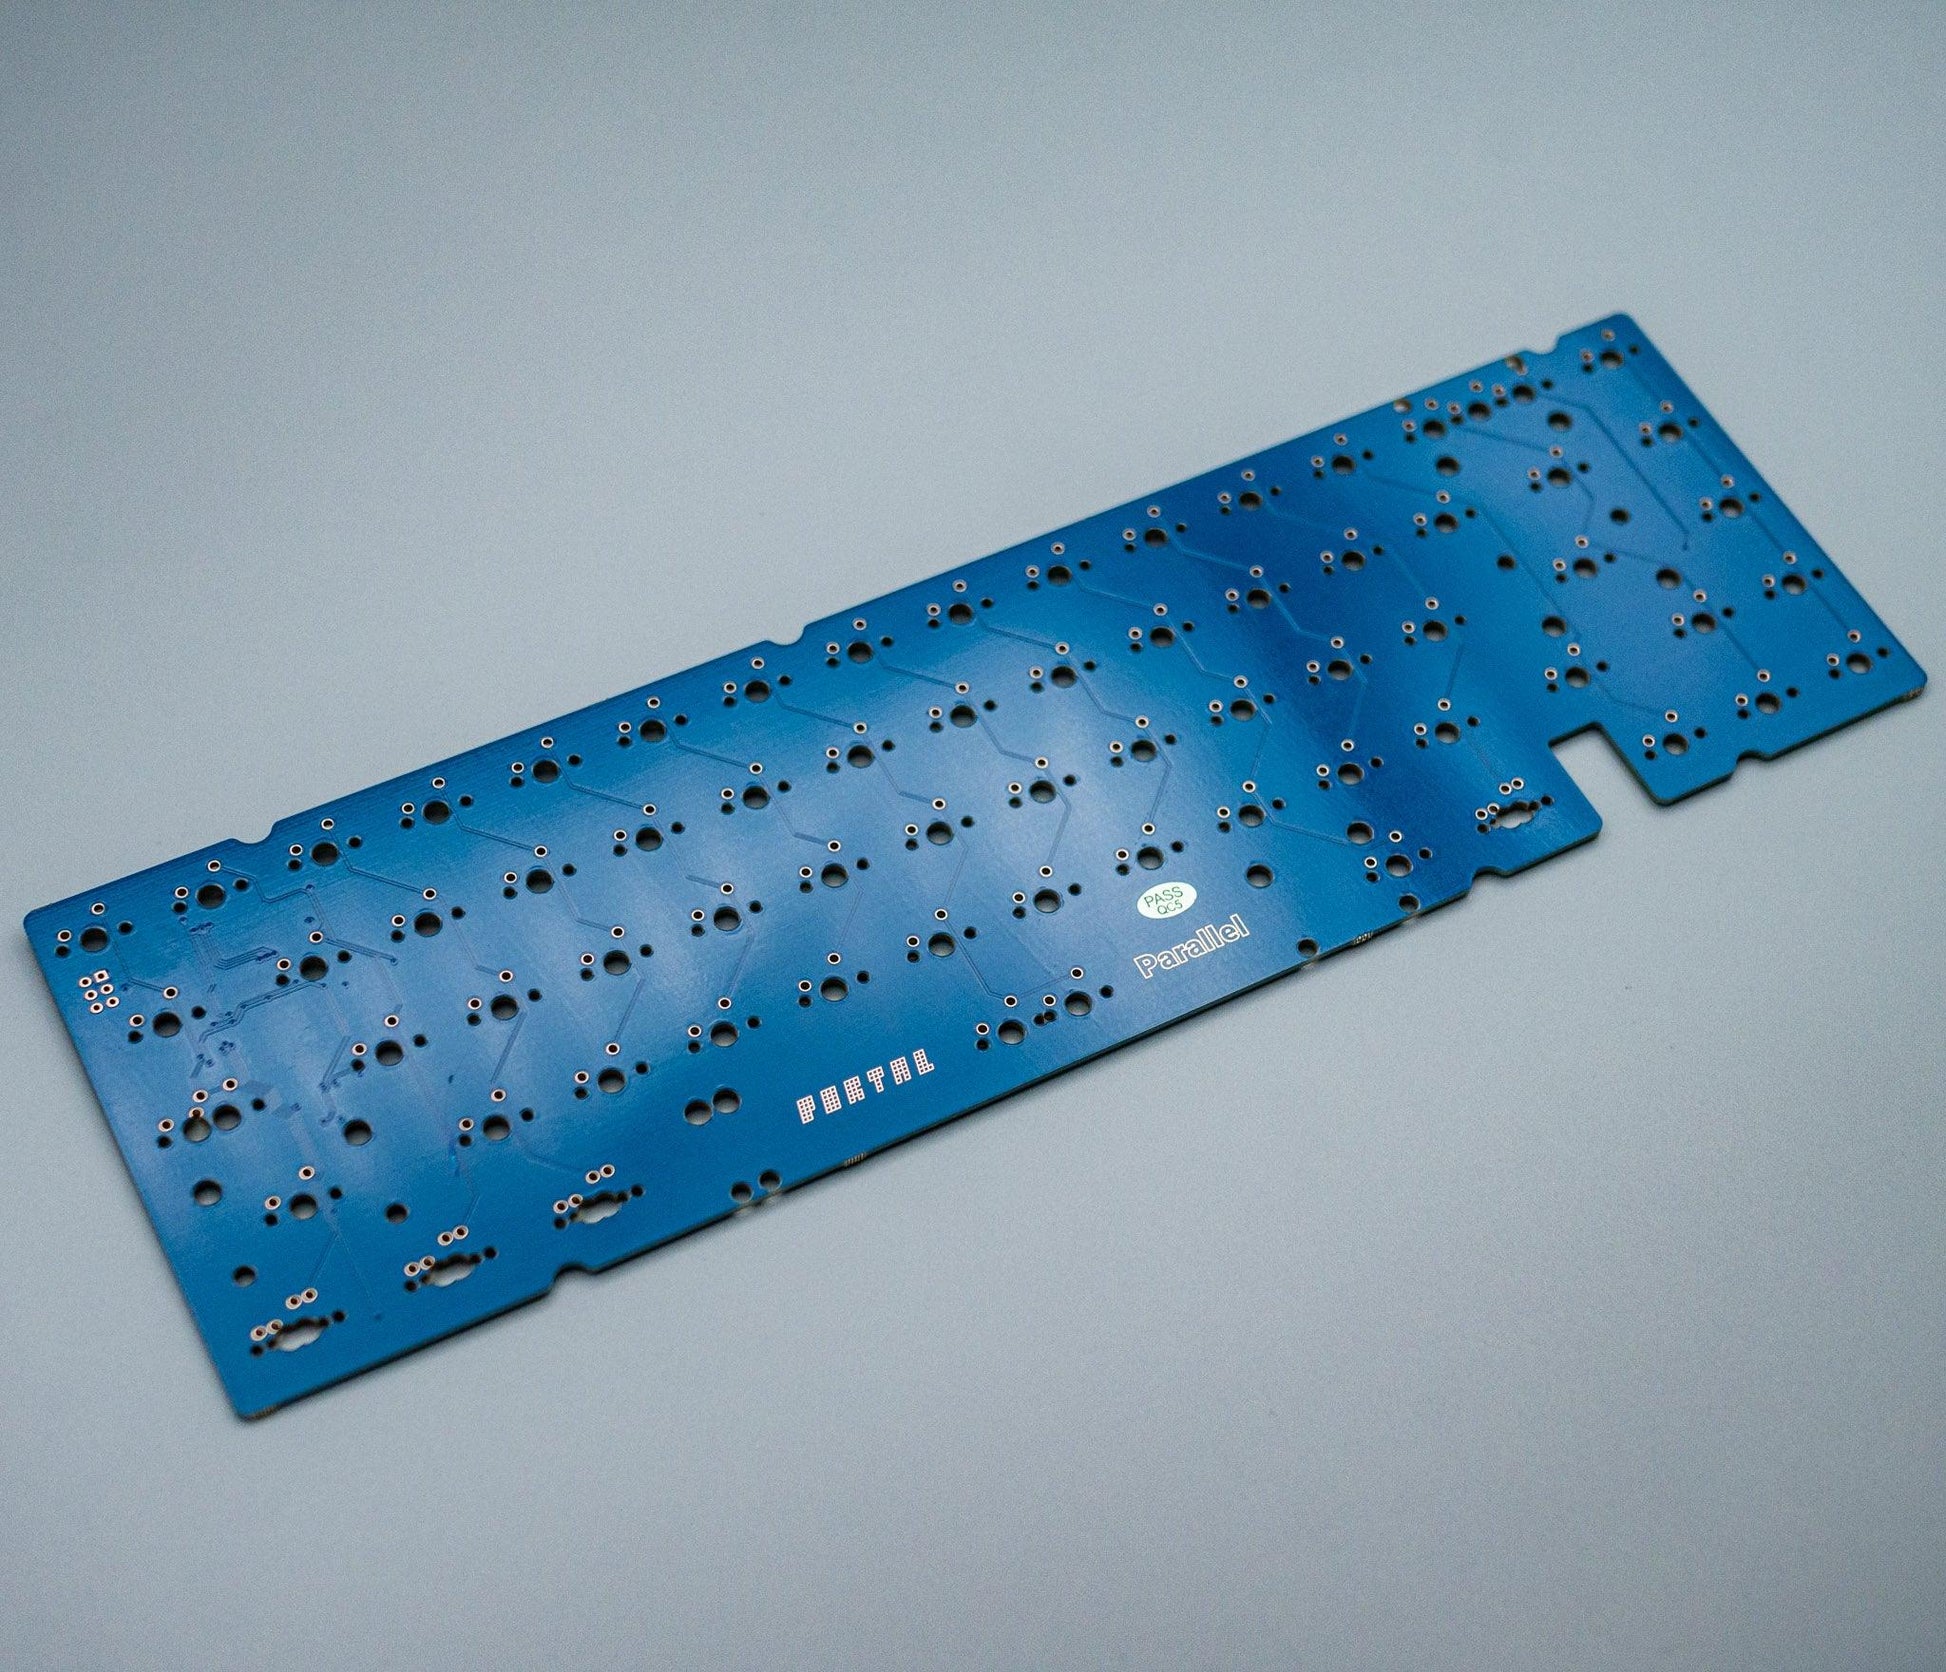 parallel limited solderable pcb 65%